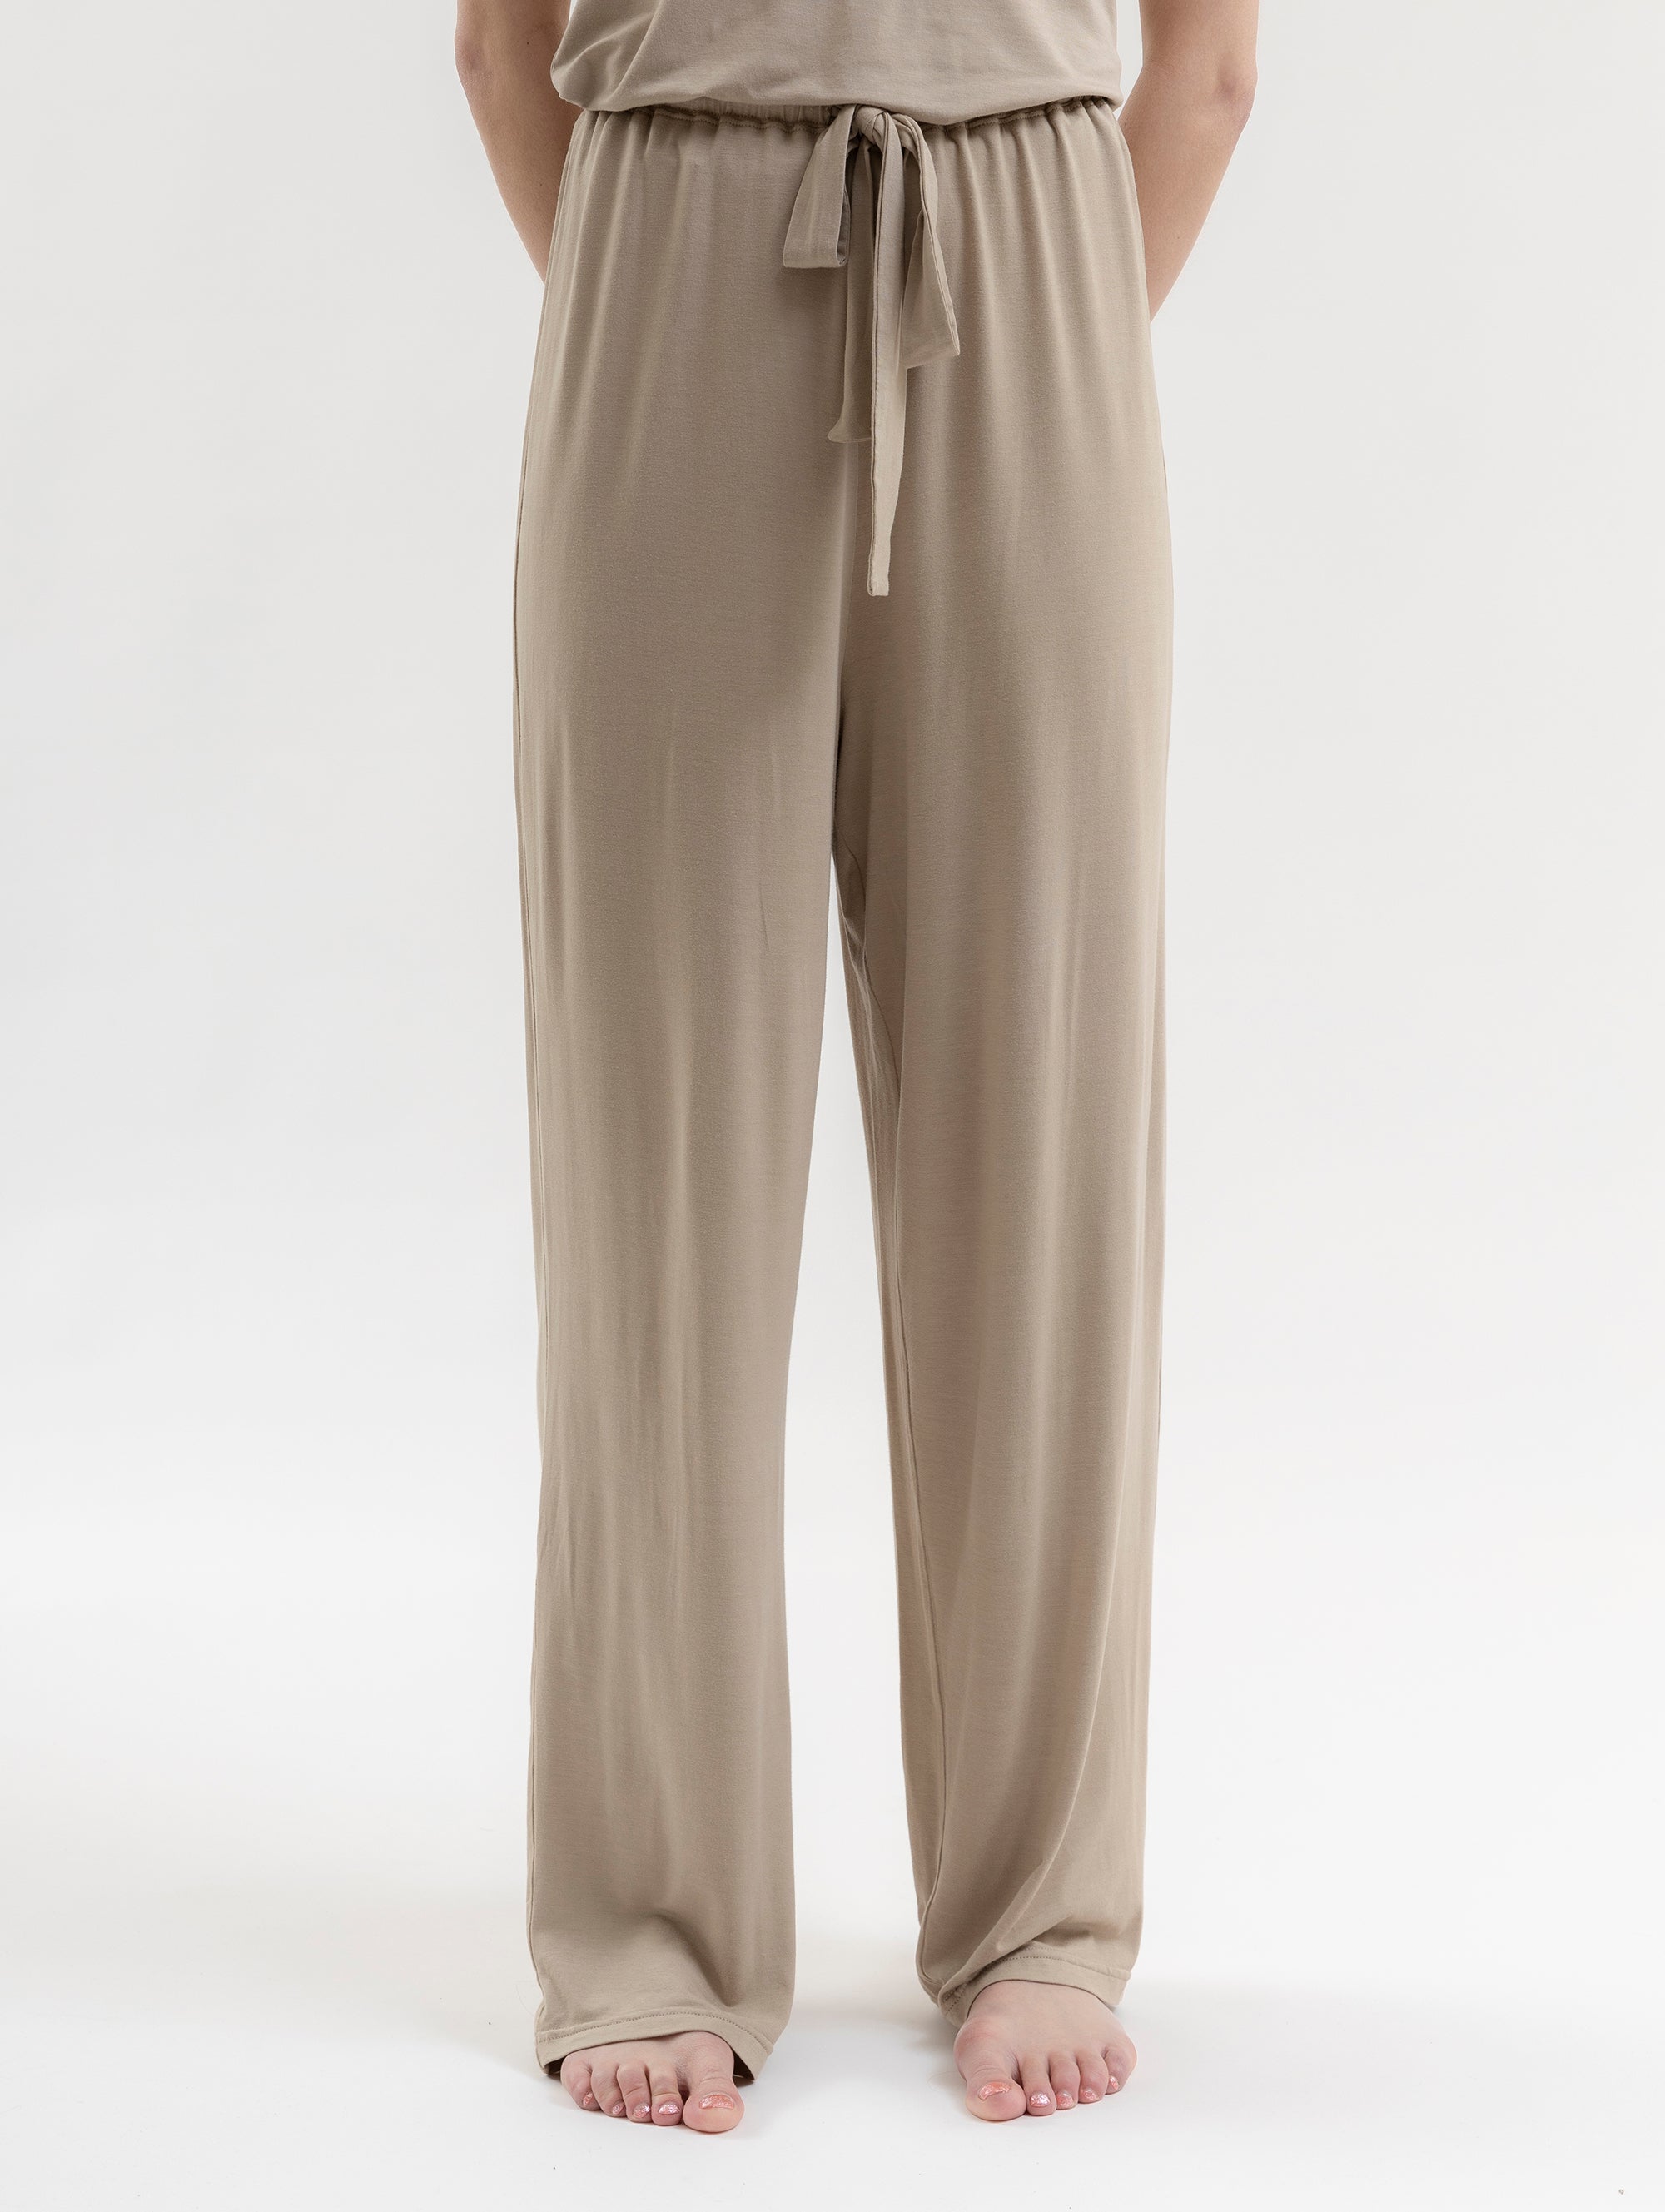 NECHOLOGY Lounge Pants for Women Loose Fit Autumn And Winter